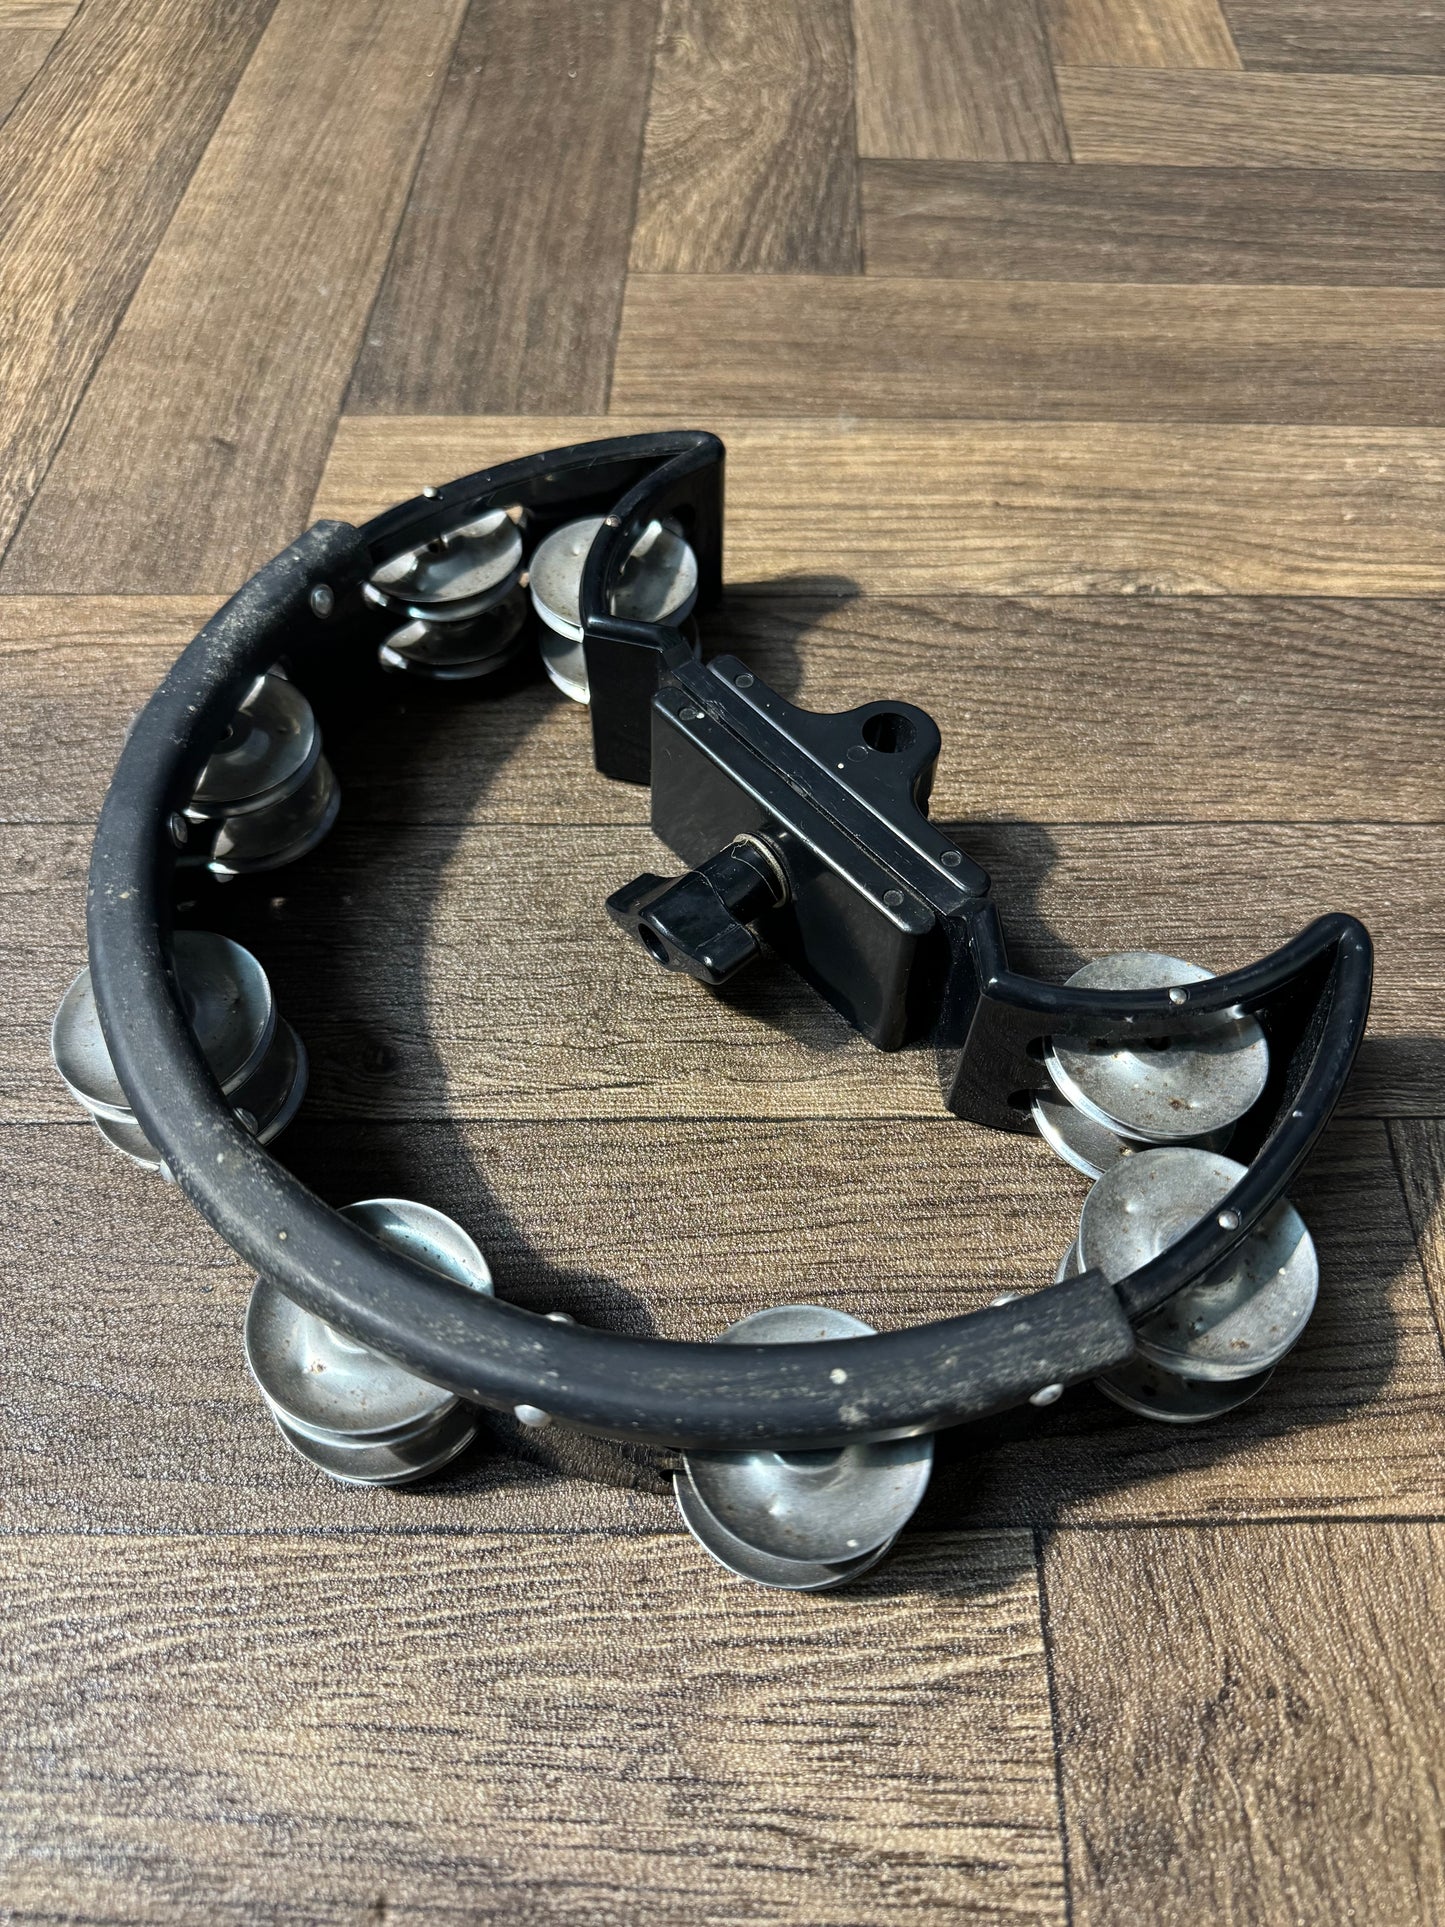 Stagg Mounted Tambourine / Drum Hardware / Accessory #LD38